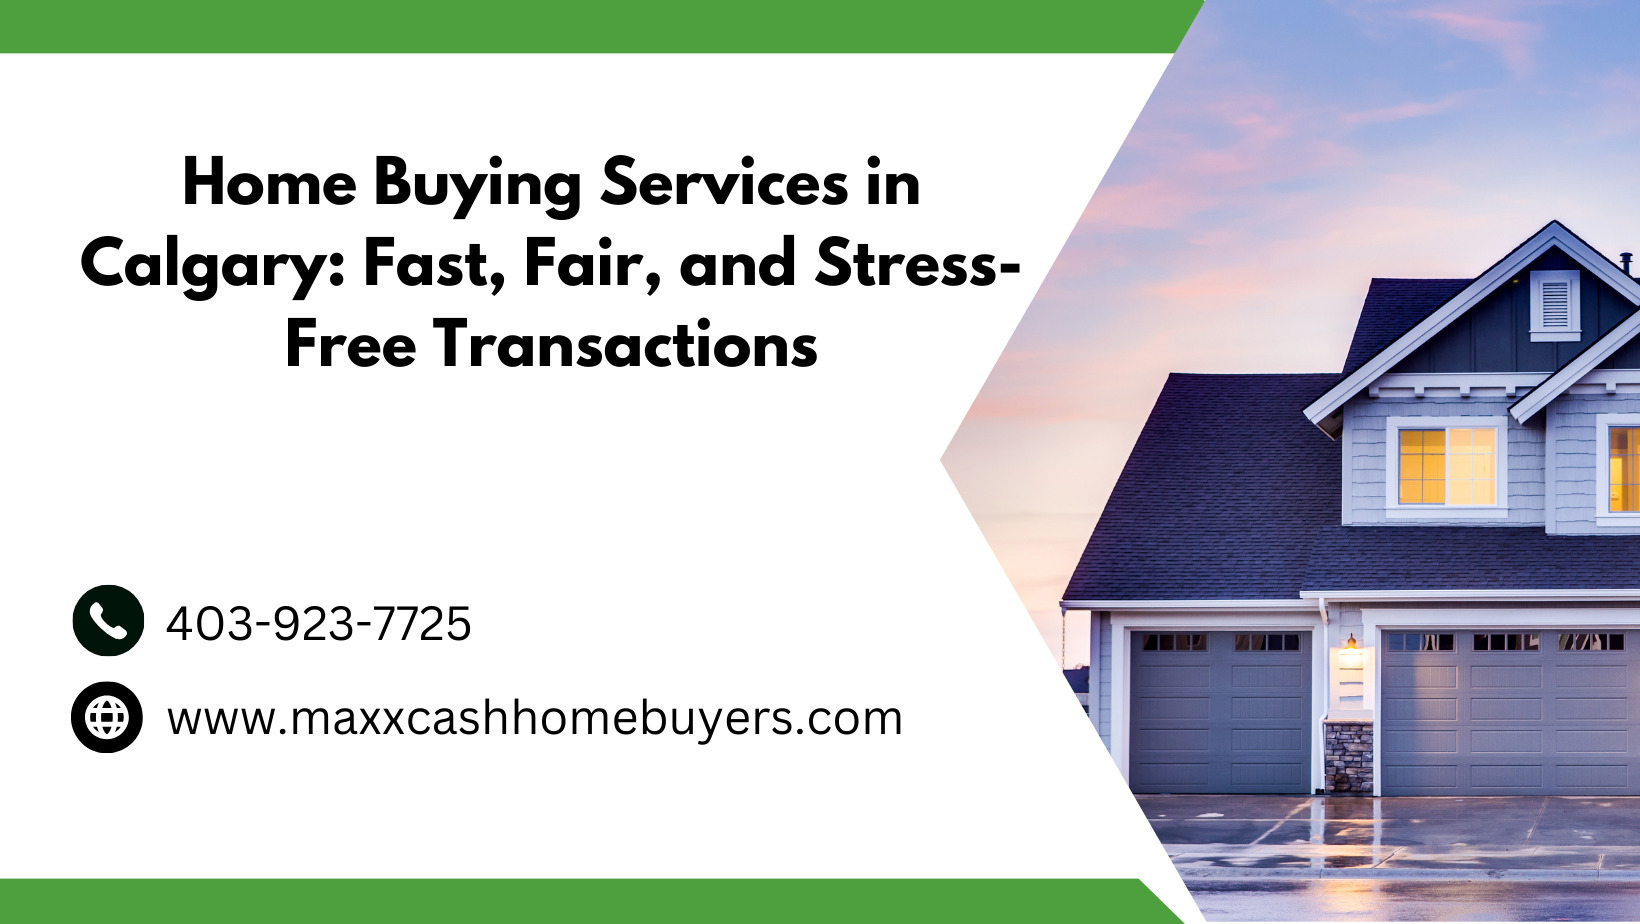 Home Buying Services in Calgary Fast, Fair, and Stress-Free Transactions